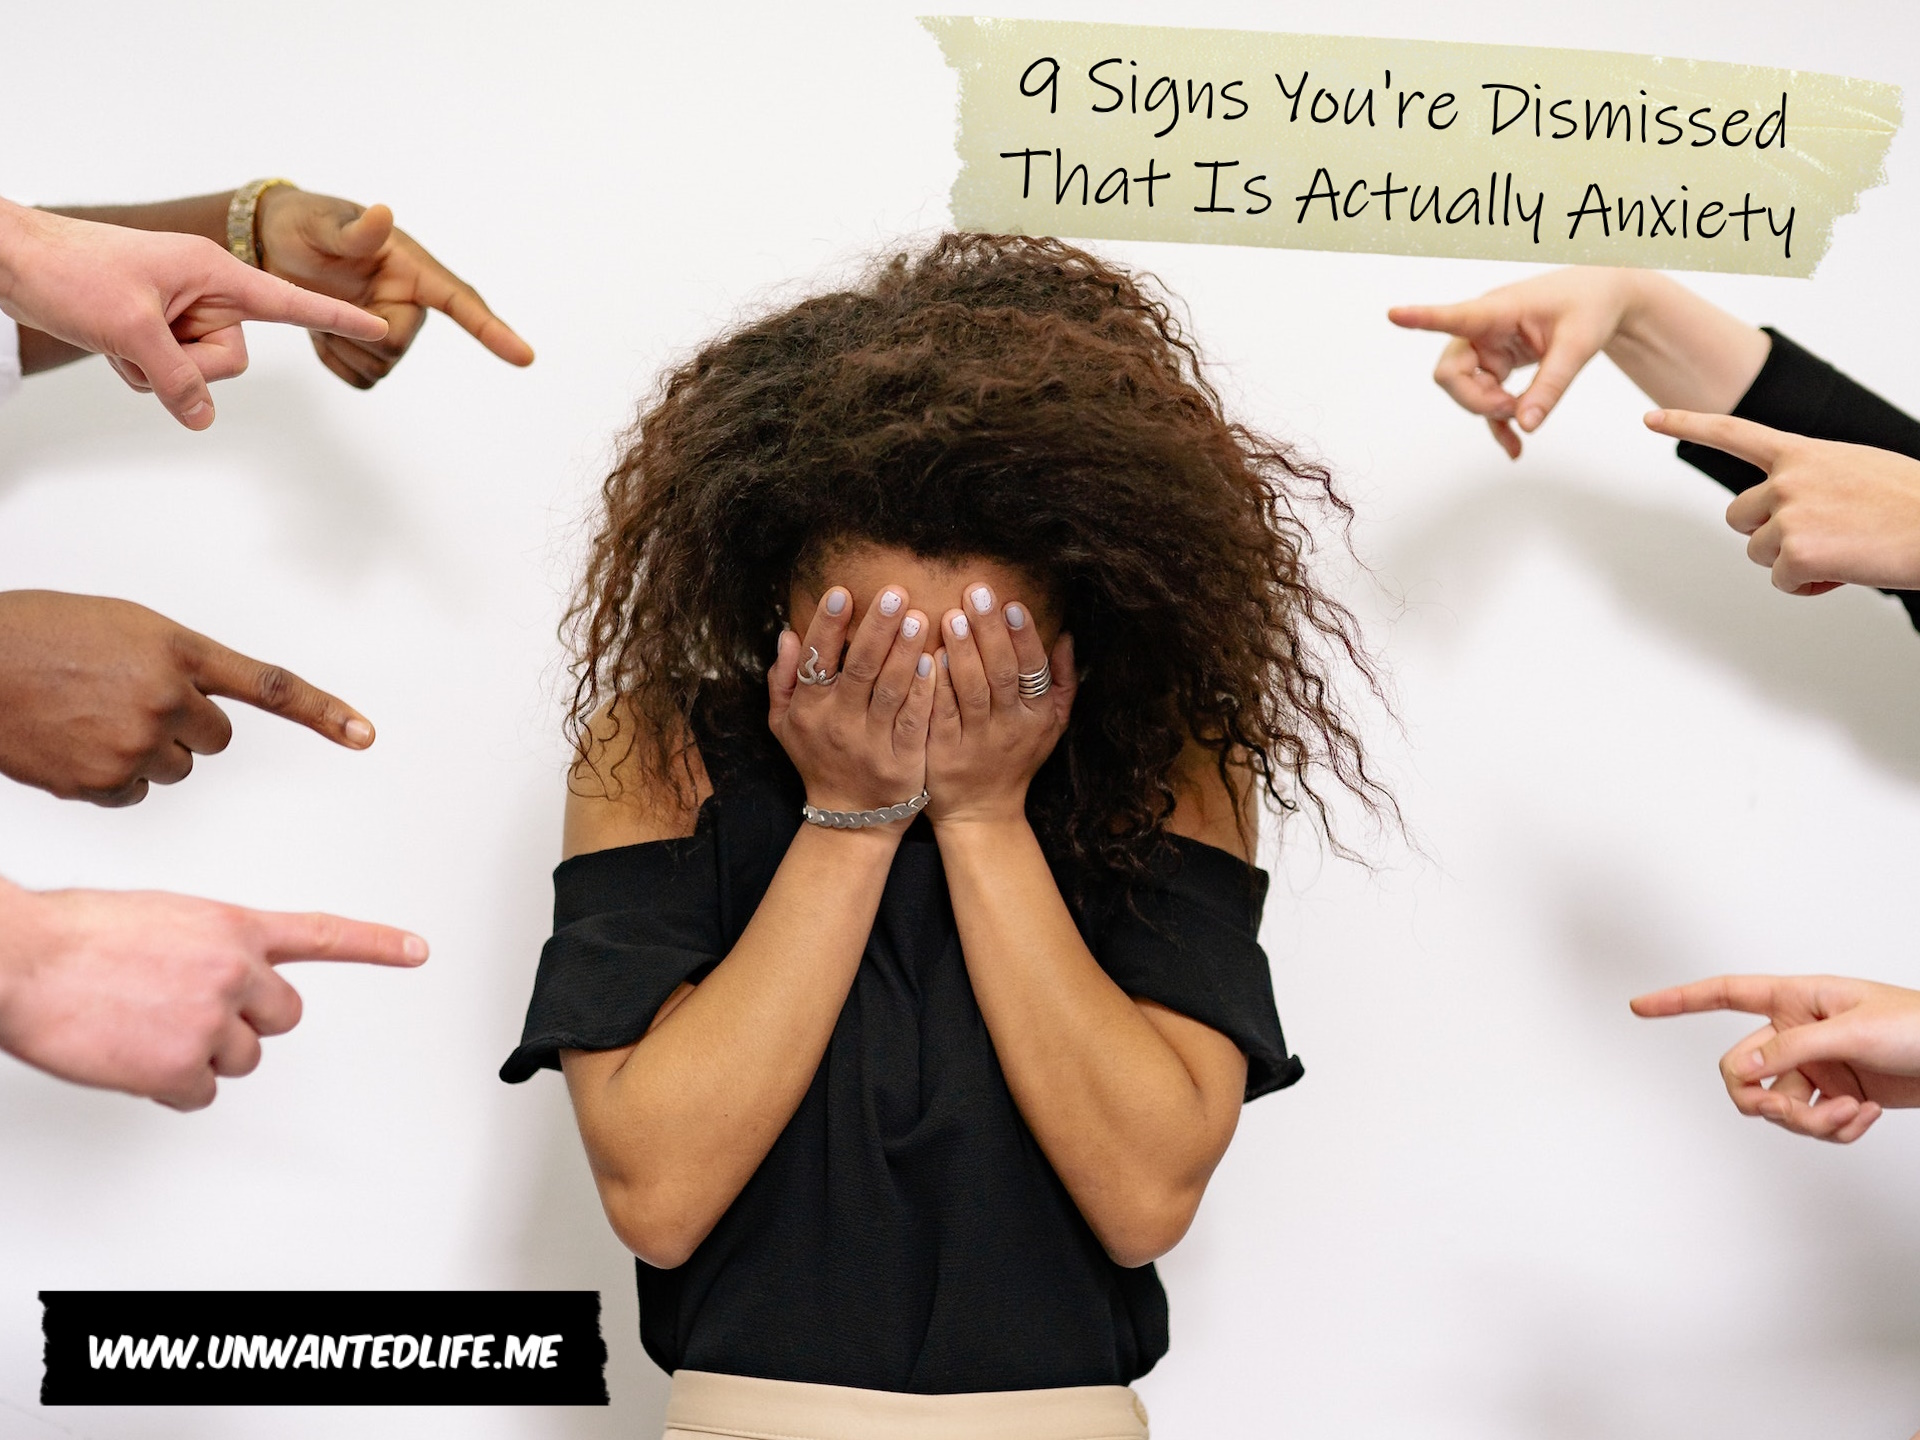 A photo of a Black woman with her head in her hands with several hands pointing at her to represent the topic of the article - 9 Signs You're Dismissed That Is Actually Anxiety